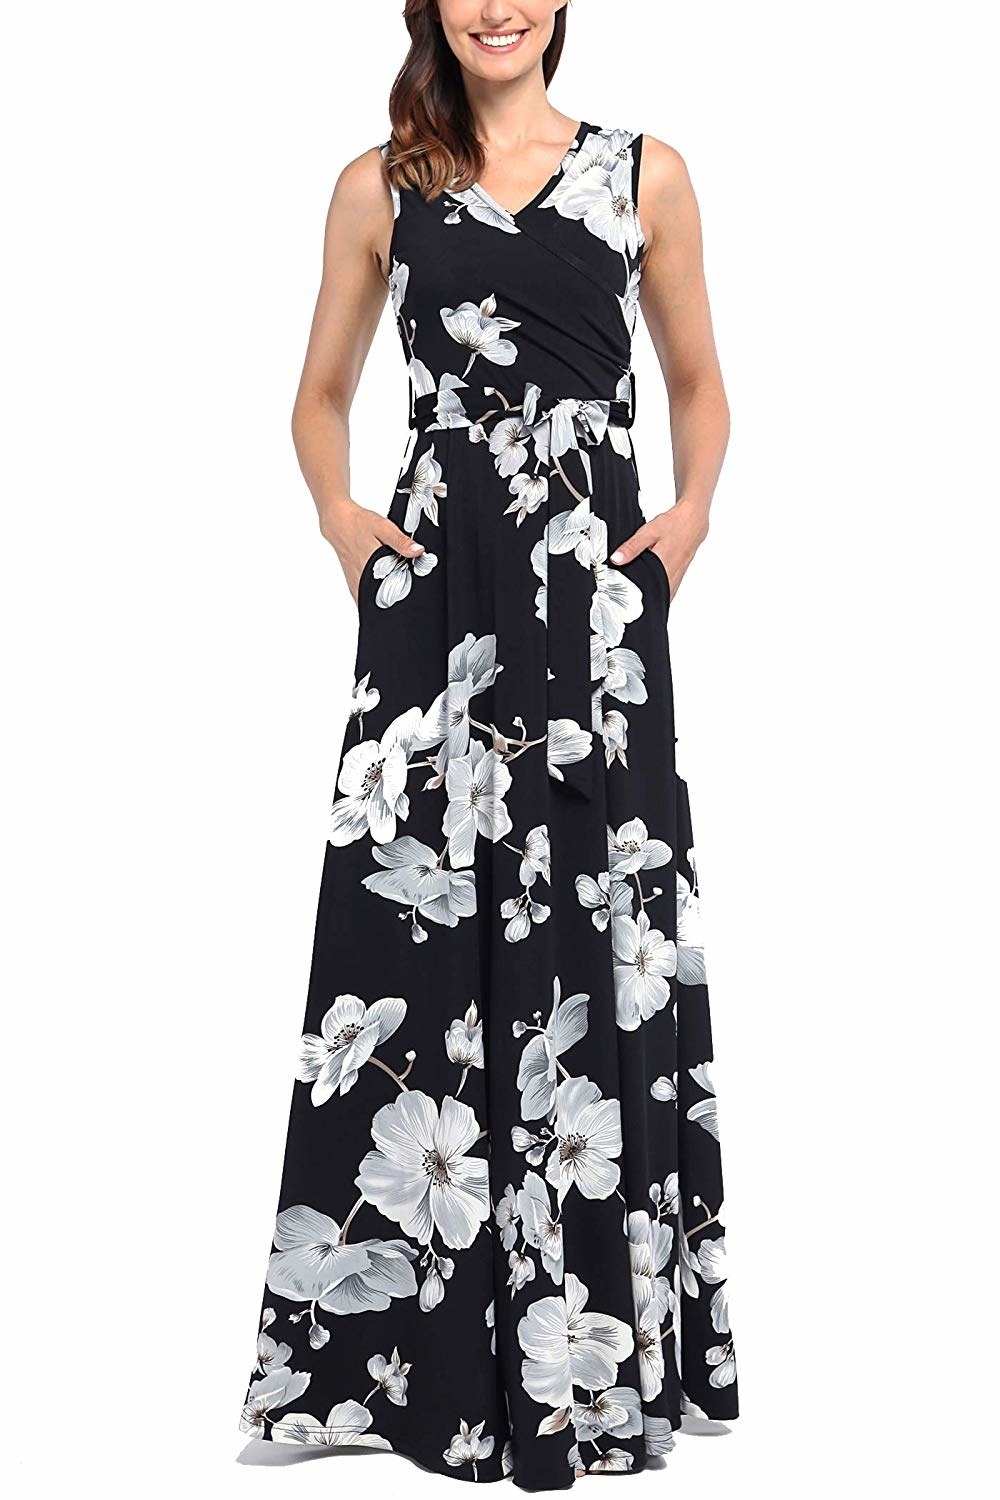 19 Fabulous Maxi Dresses With Handy Pockets You May Want To Wear All ...